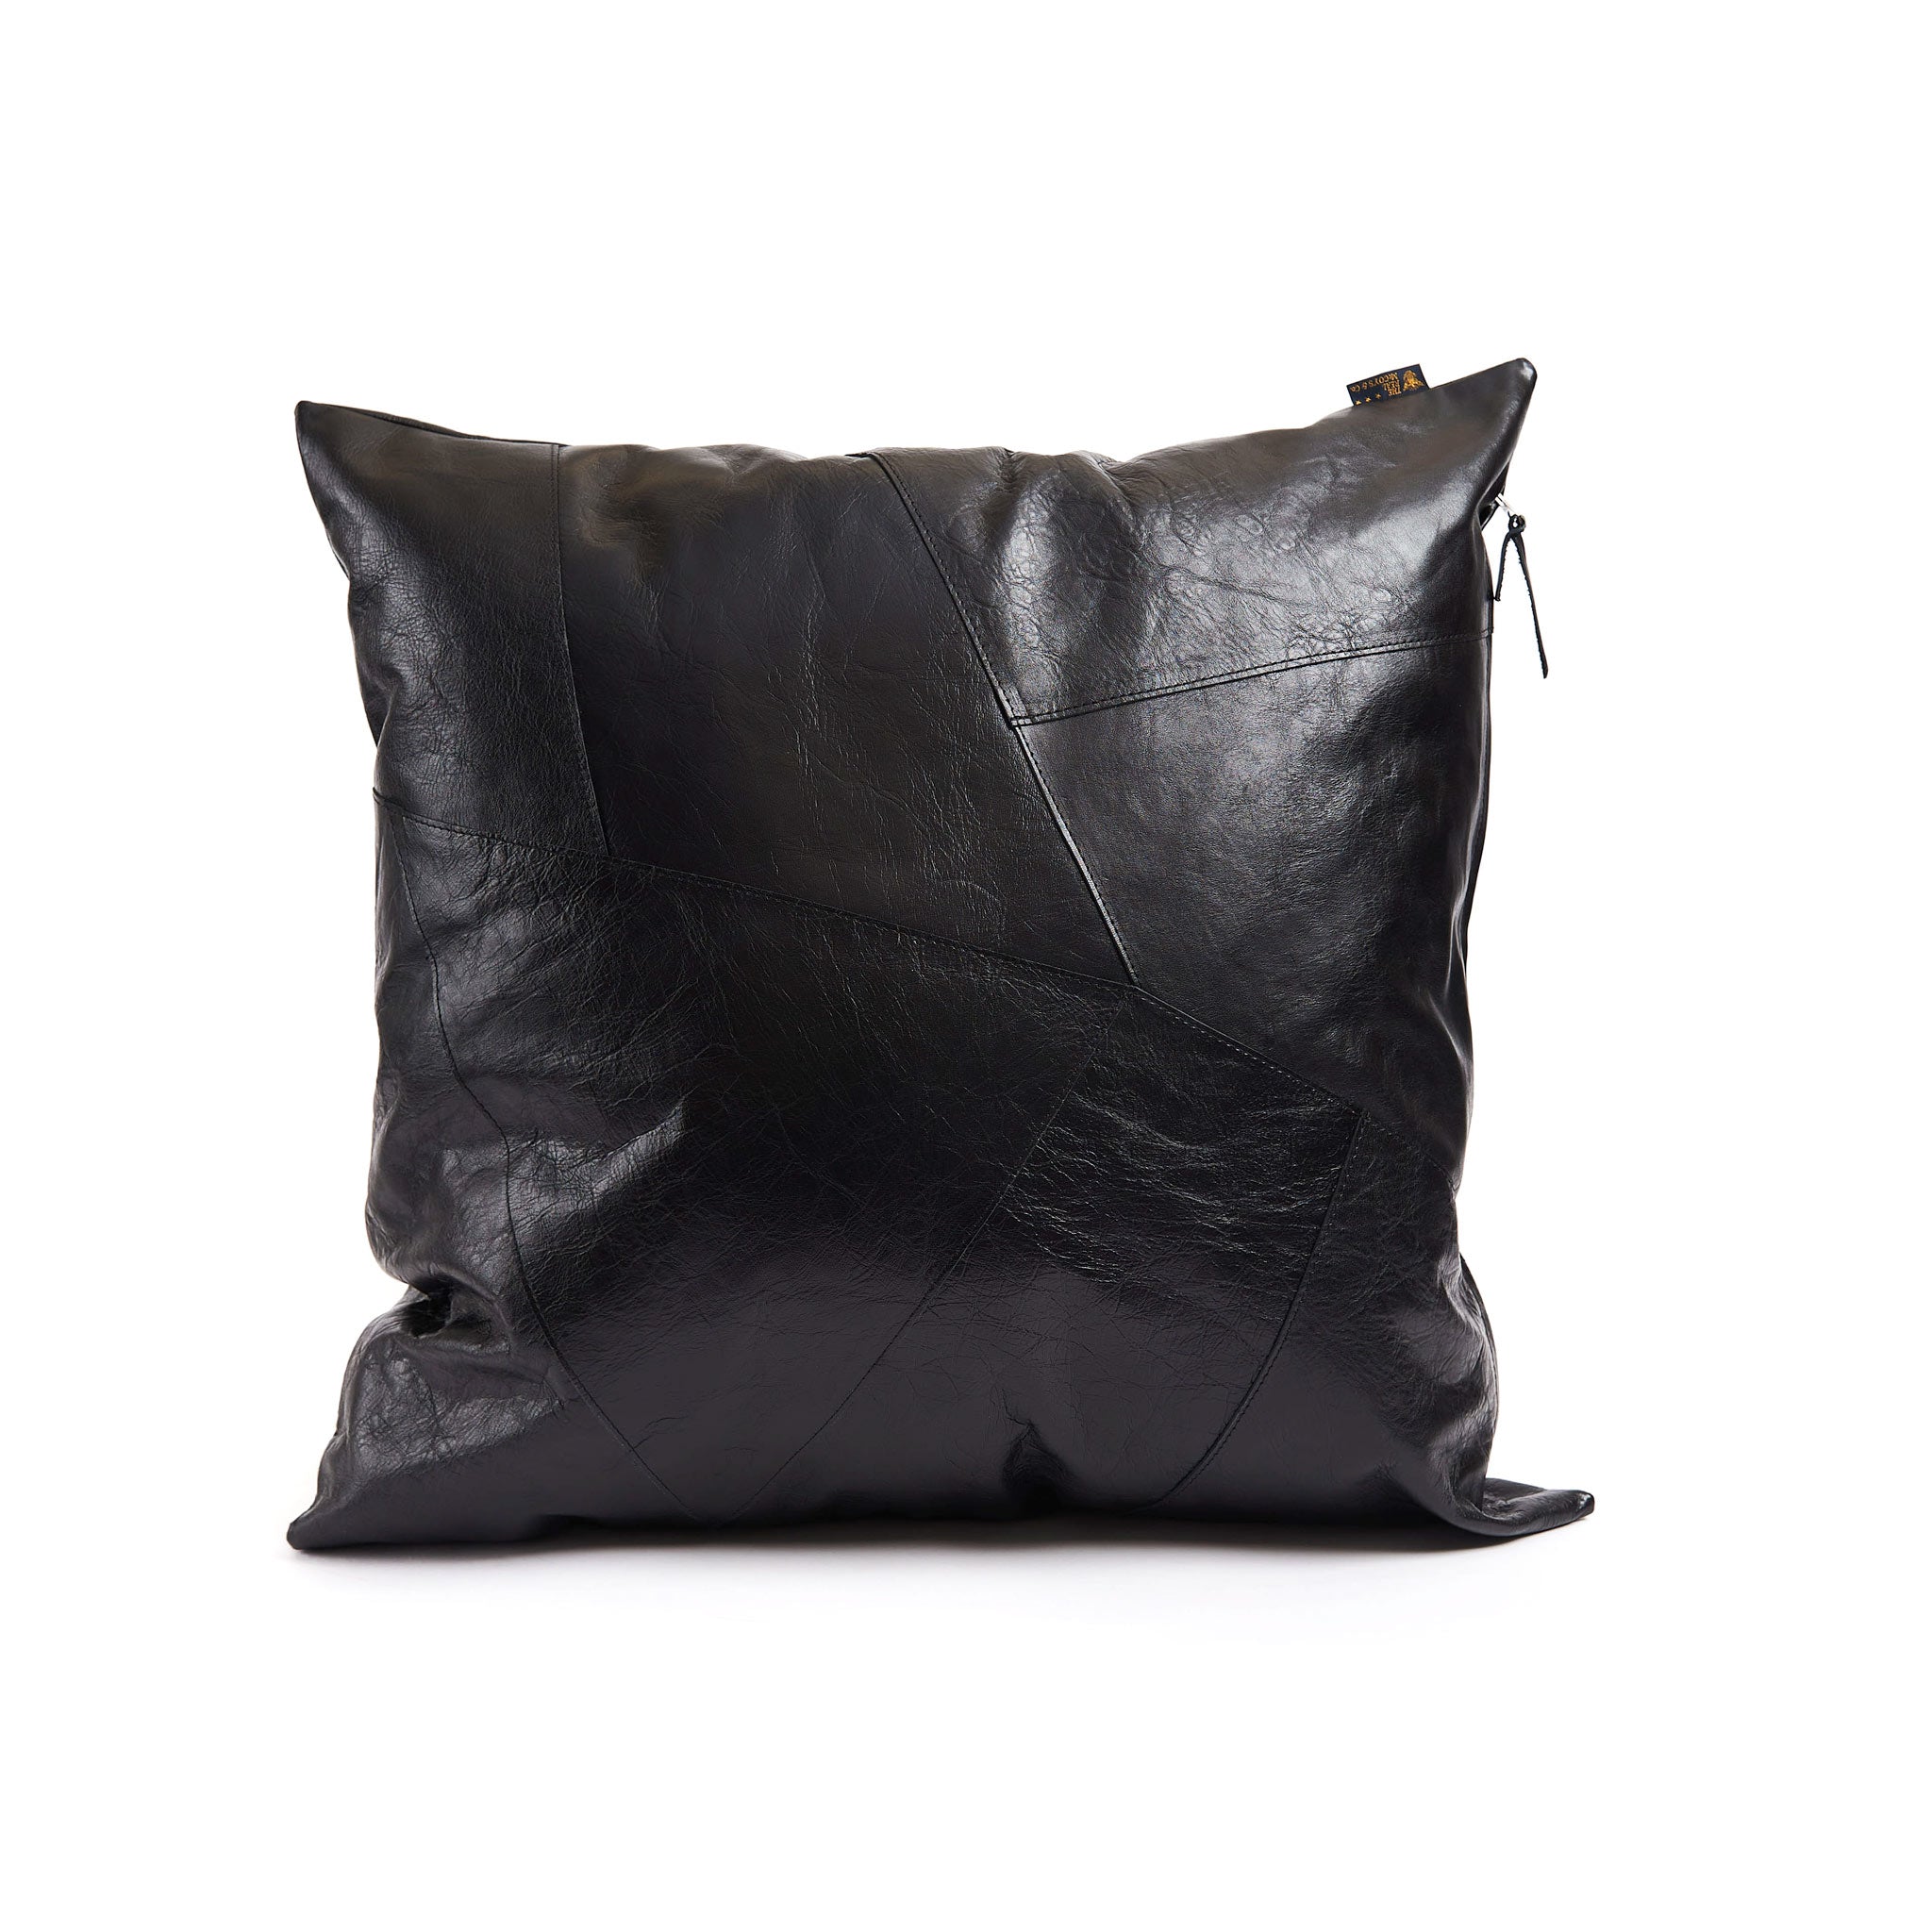 The Real McCoy's MW18101 Horsehide Cushion (Large) Black